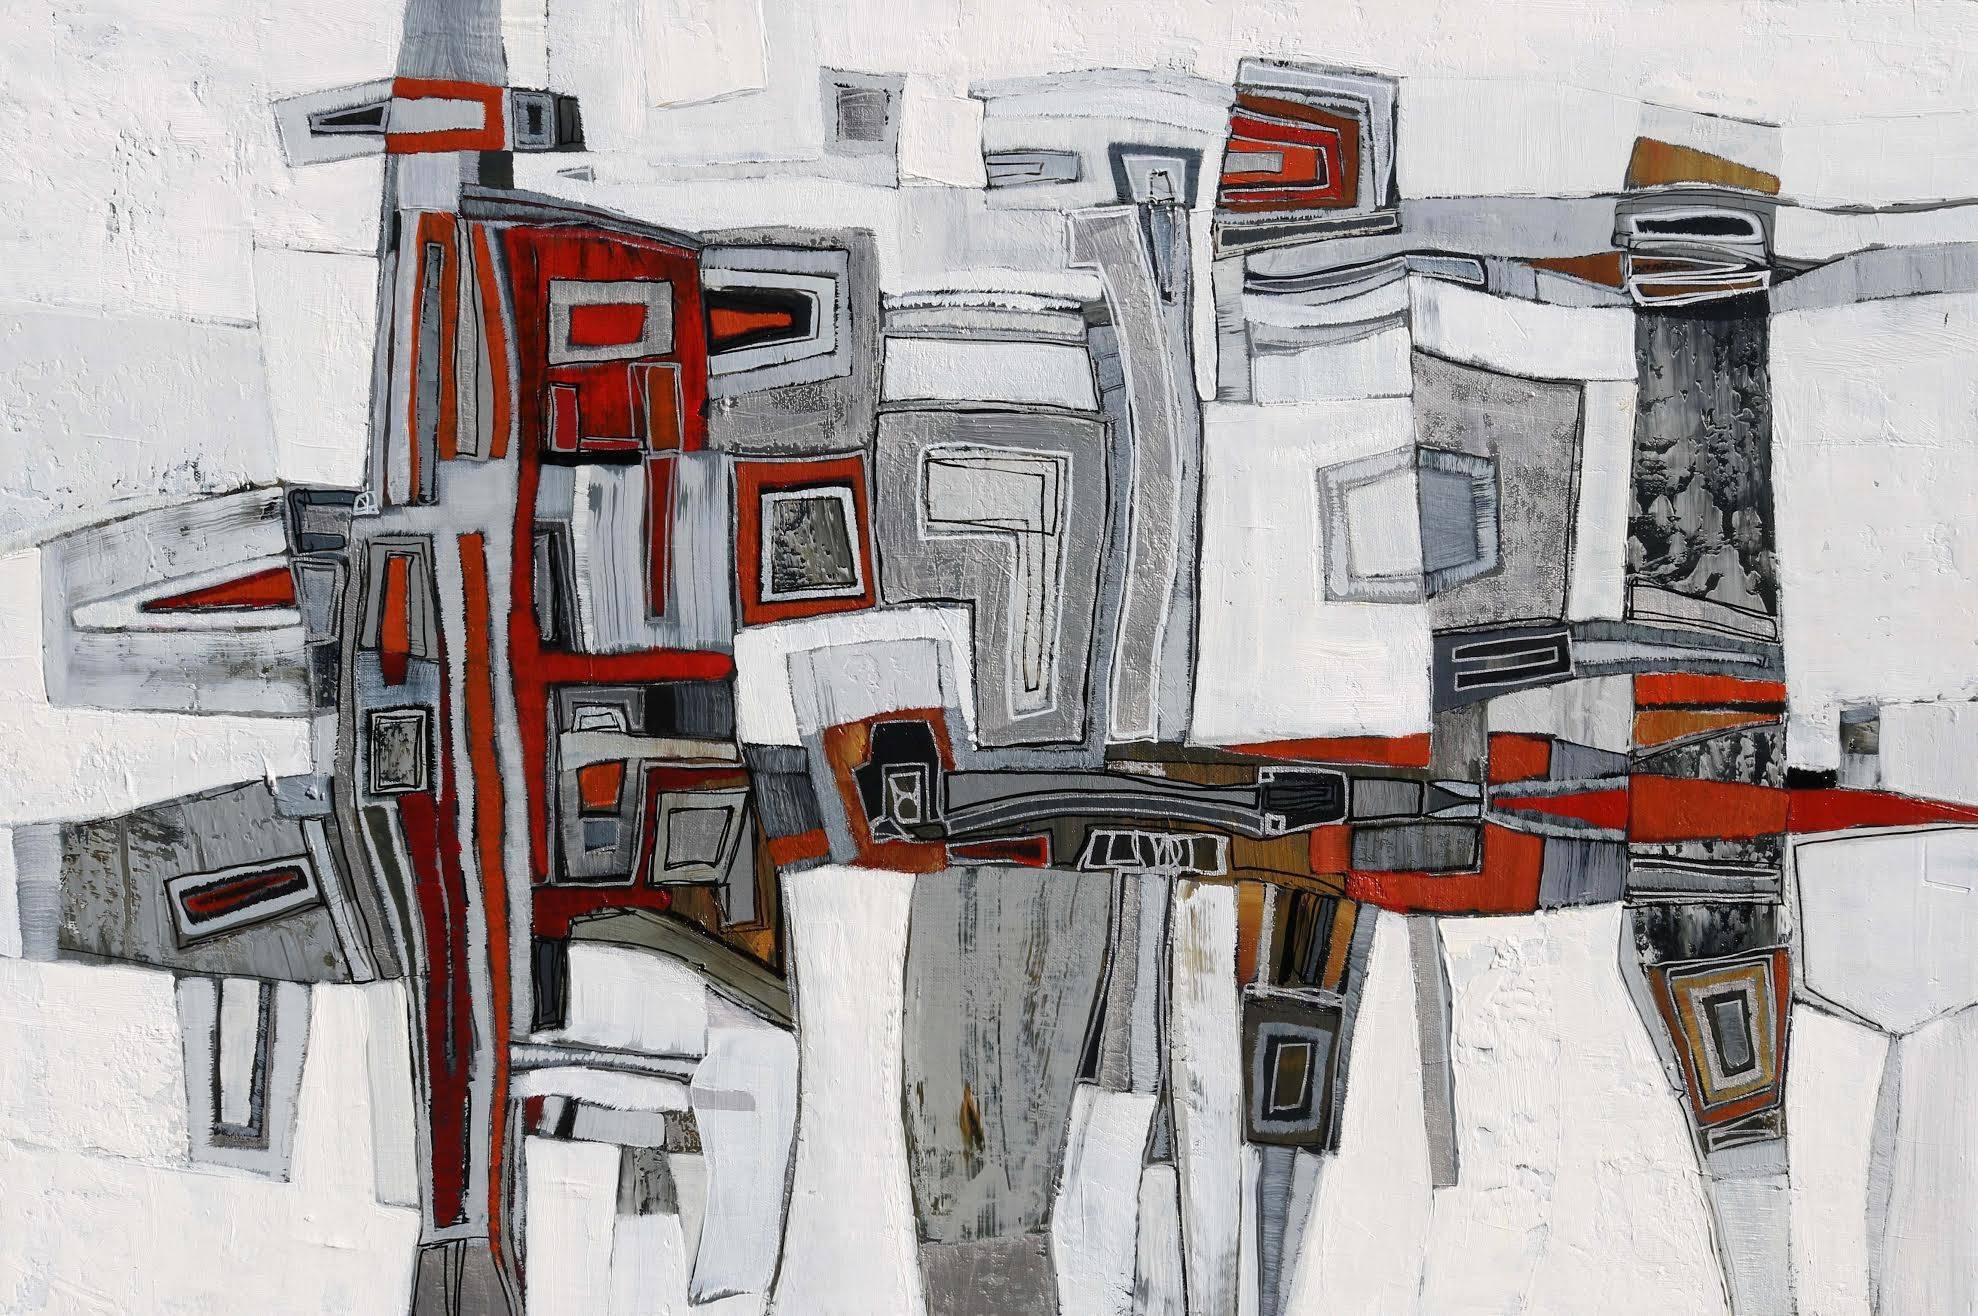 Chase Langford Abstract Painting - "Essex 4" geometric abstract oil painting in red, grey and white